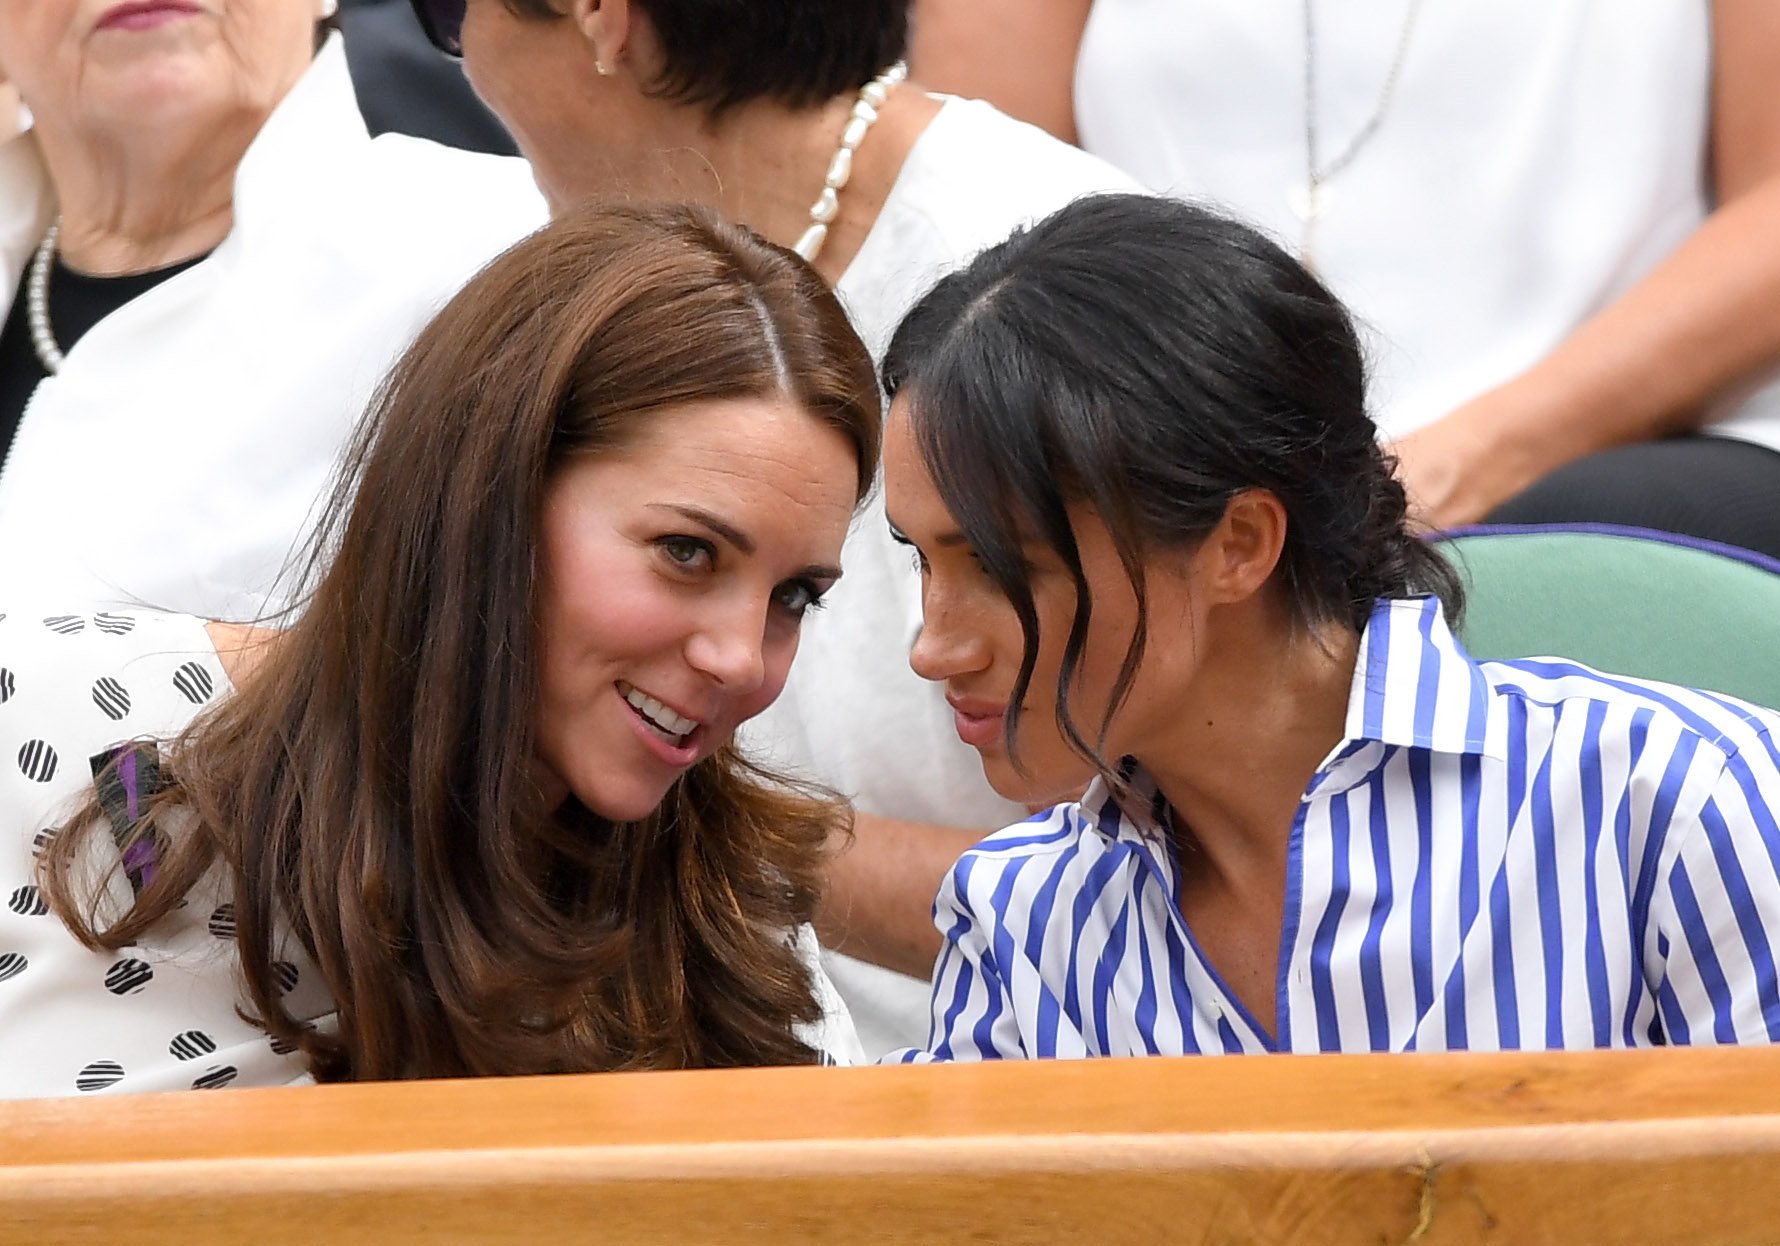 Kate Middleton and Meghan Markle during day twelve of the Wimbledon Tennis Championships at the All England Lawn Tennis and Croquet Club on July 14, 2018 in London, England. / Source: Getty Images